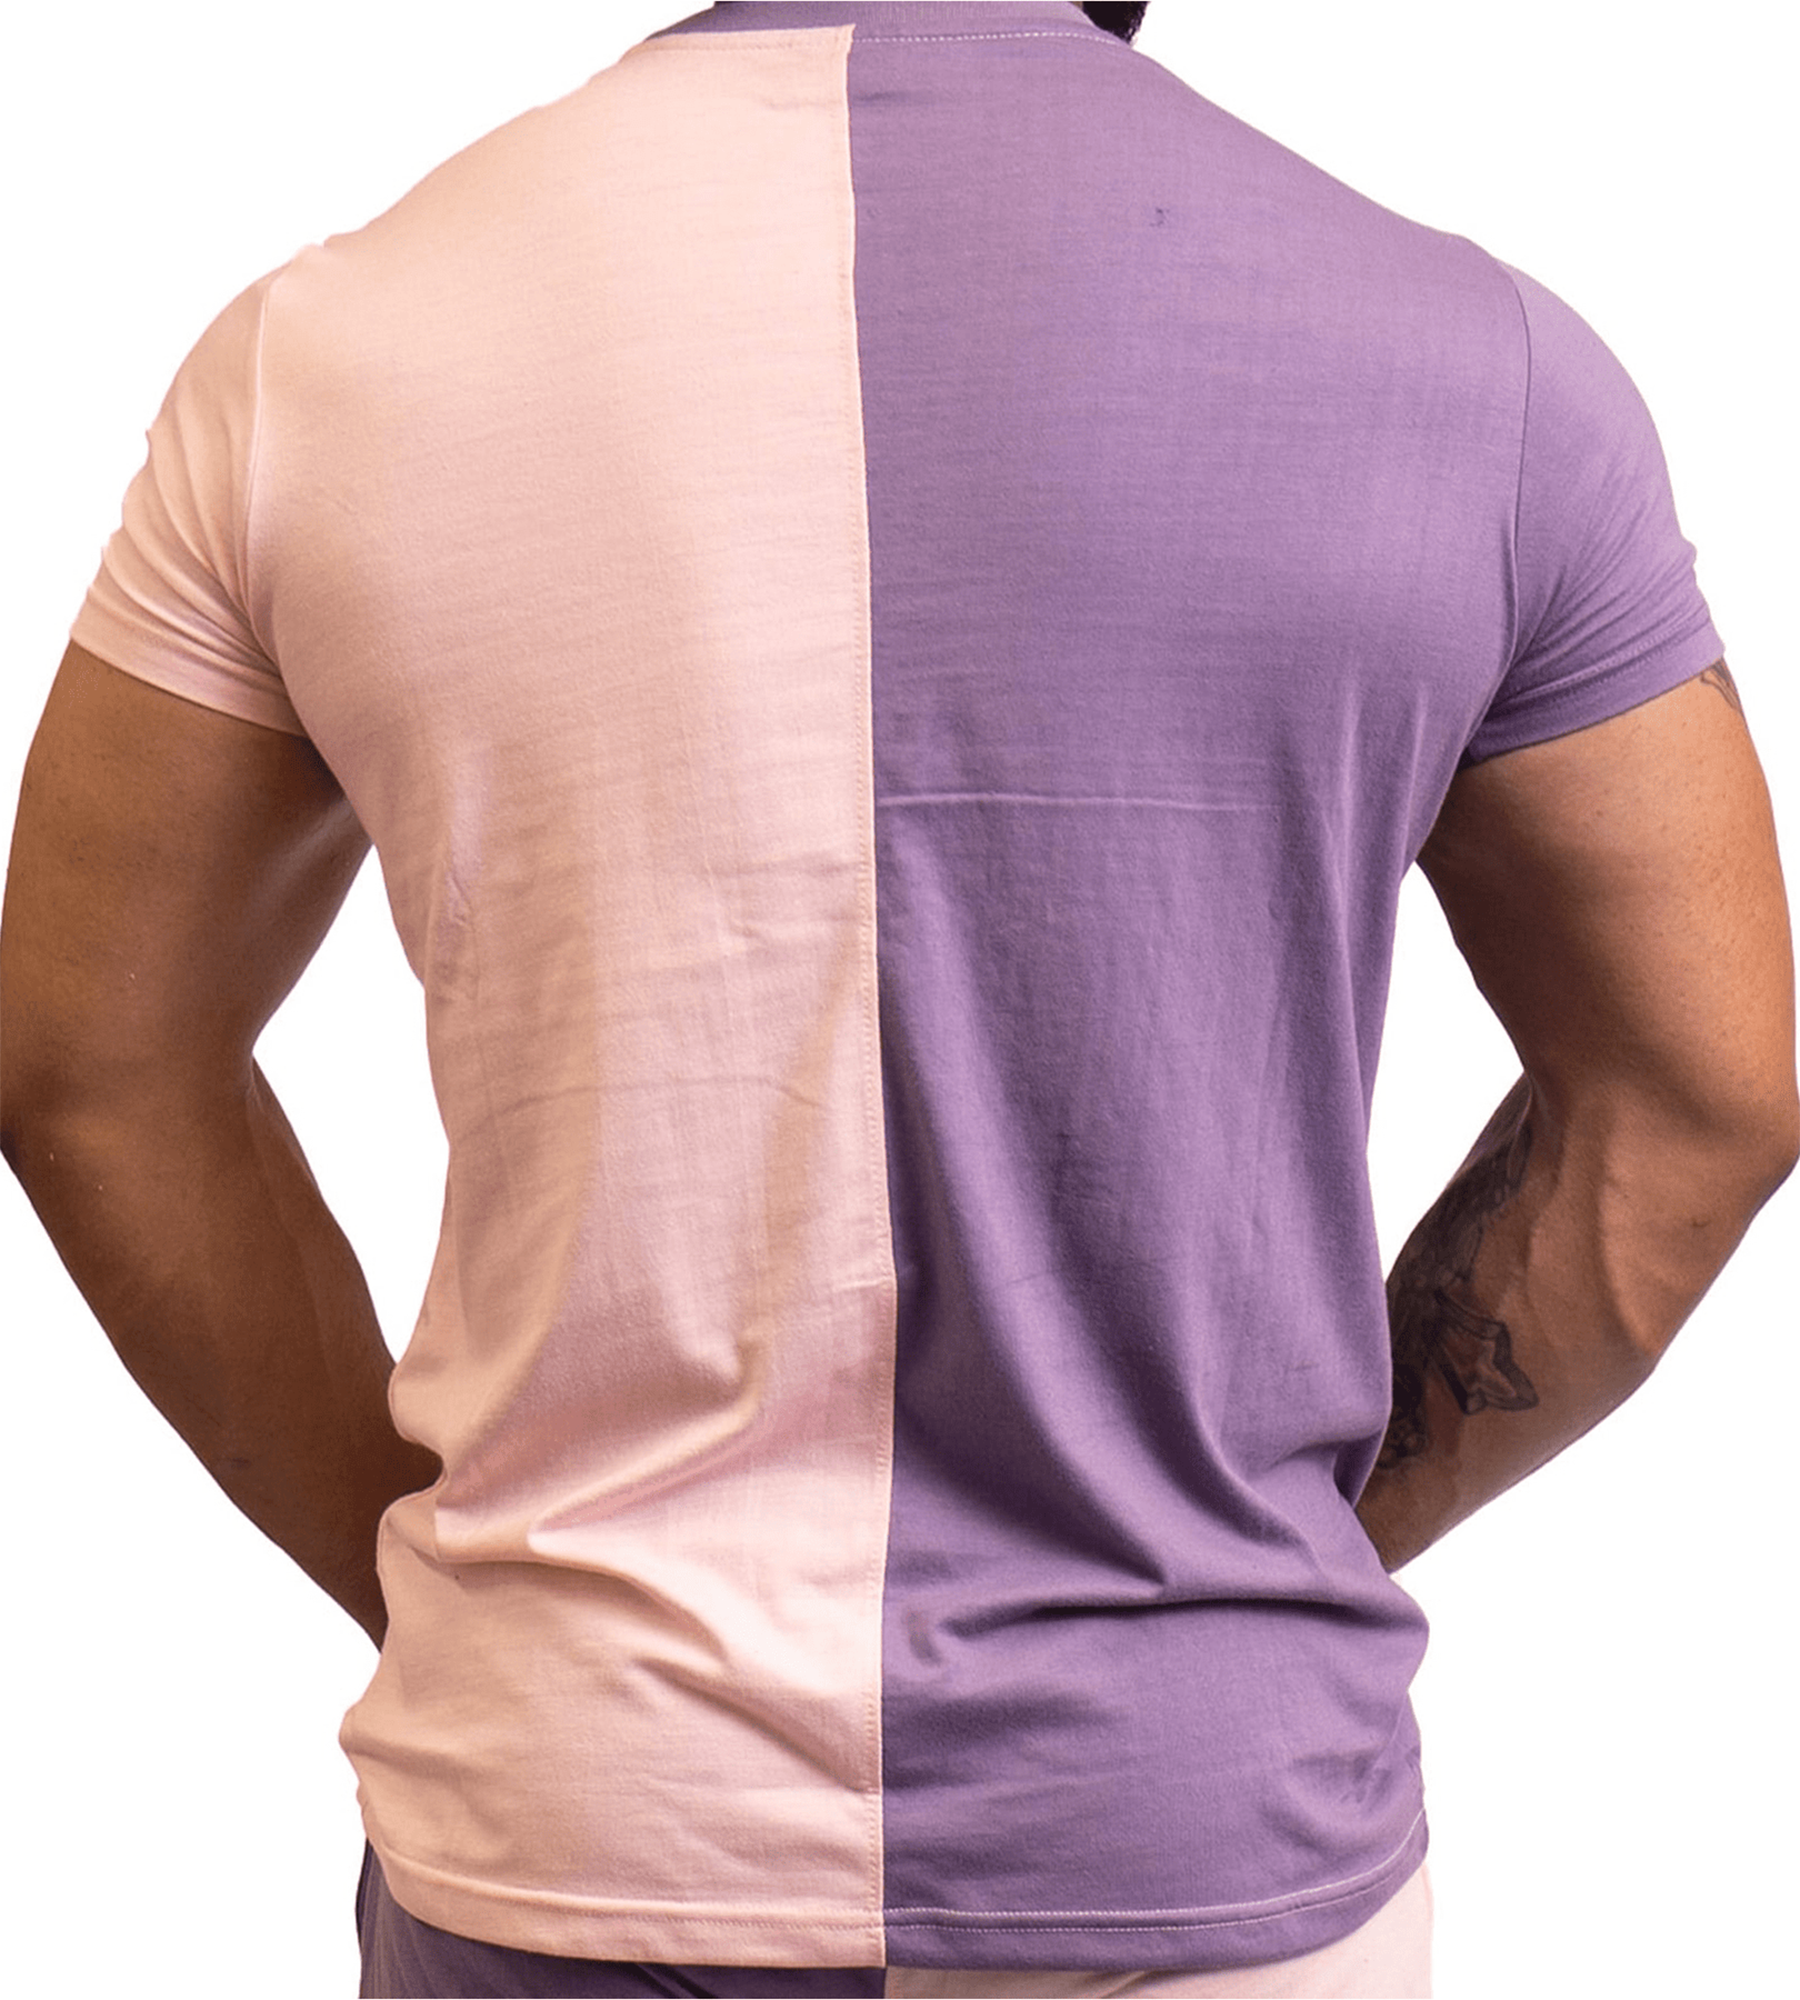 Fitnessfox UNISEX T-Shirts (Pink & Violet)